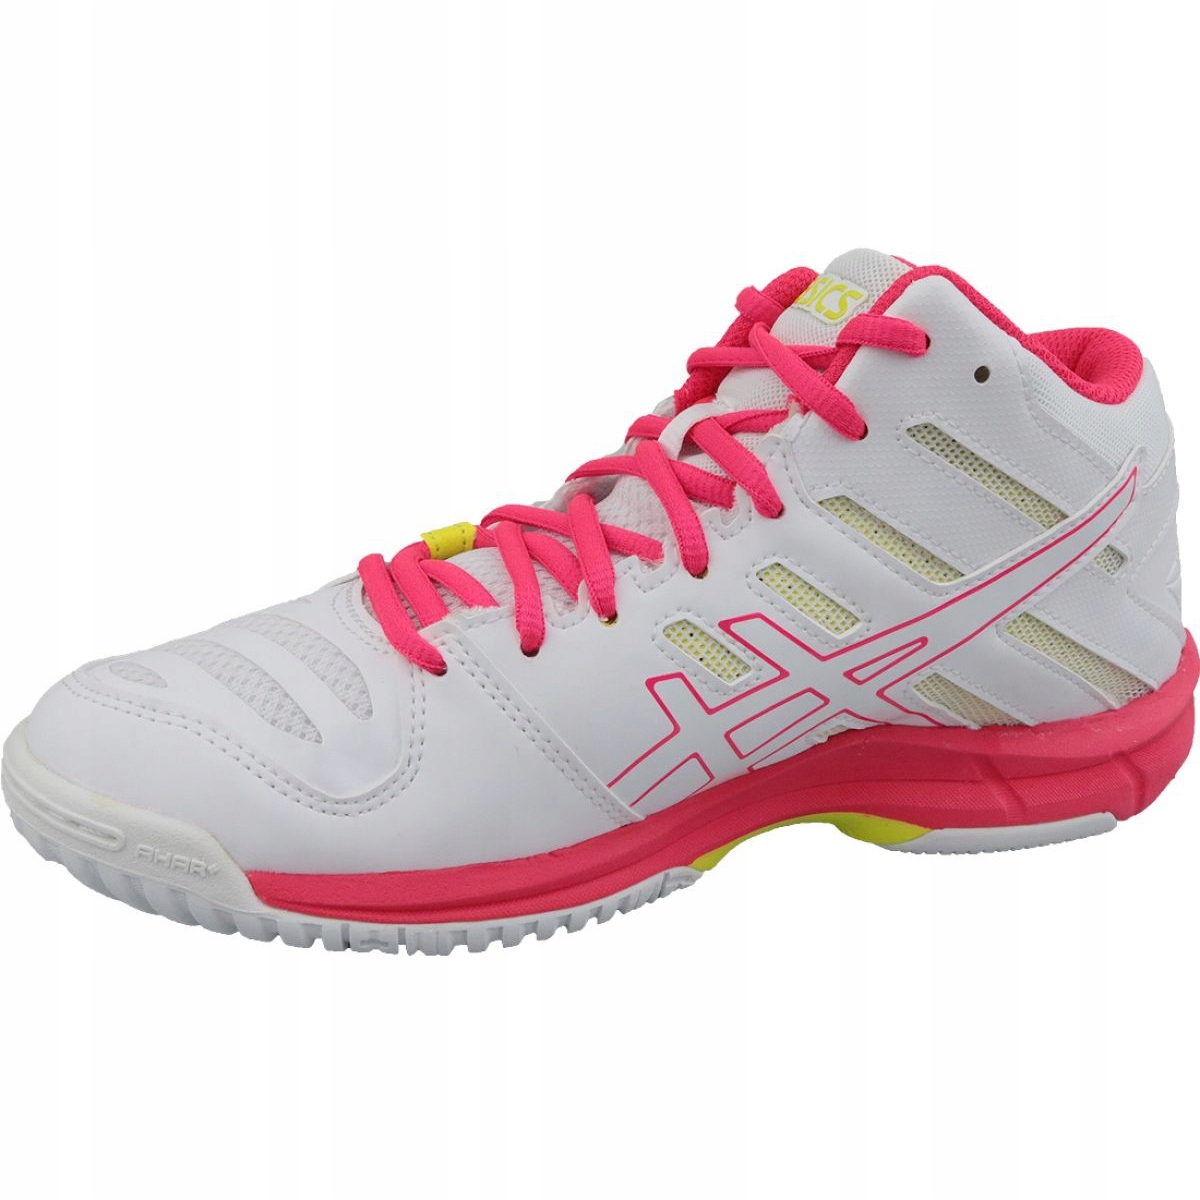 resterend compact Imperial Asics Gel-Beyond 5 Mt W B650N-100 volleyball shoes white multicolored -  KeeShoes